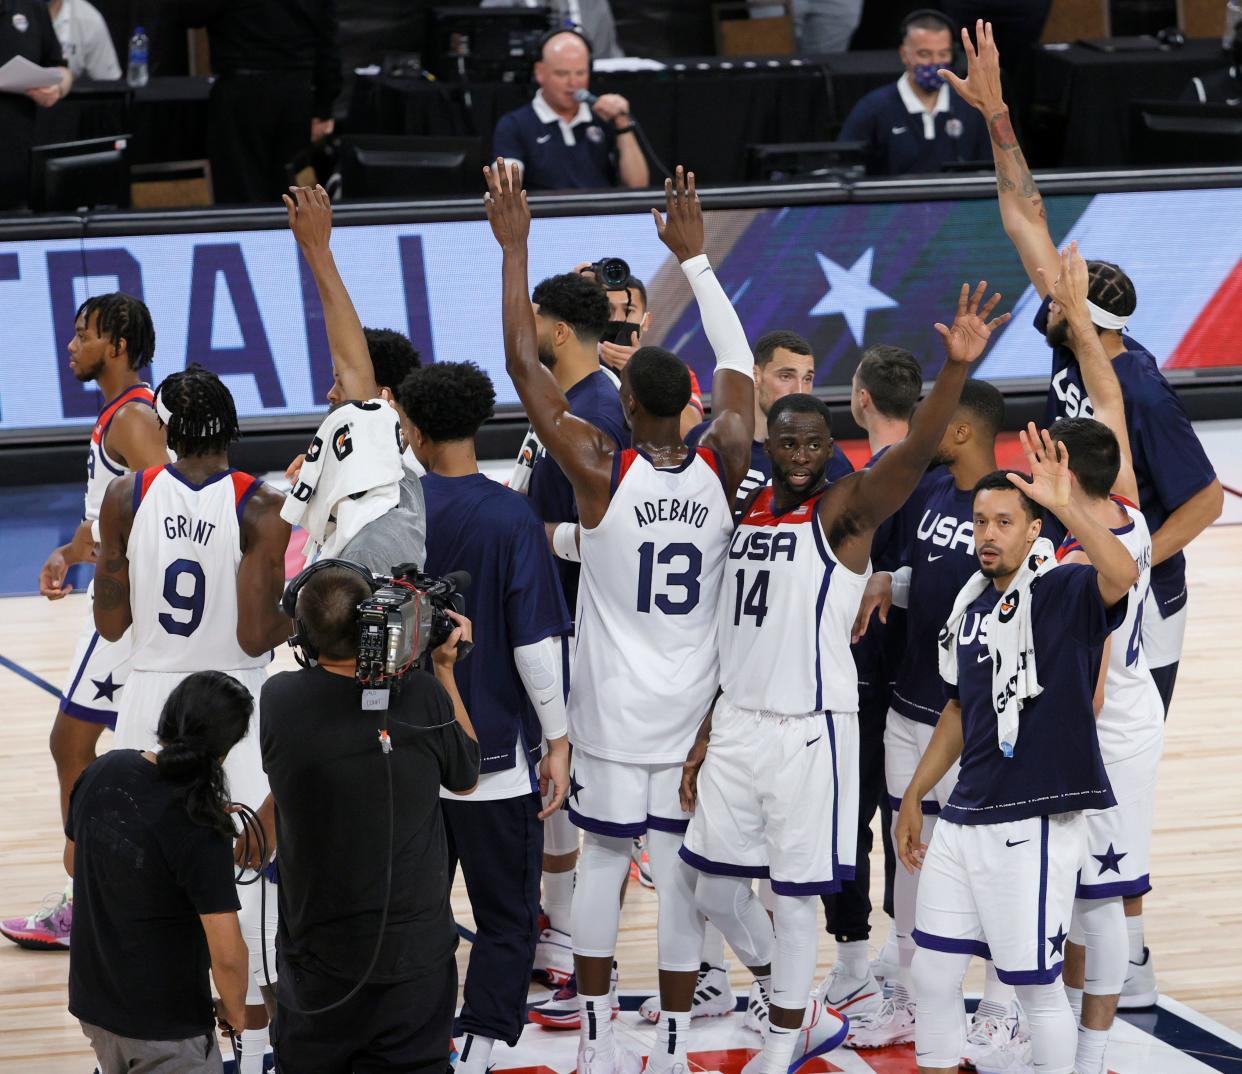 Team USA's men's basketball team hopes to win gold again at the Summer Olympics